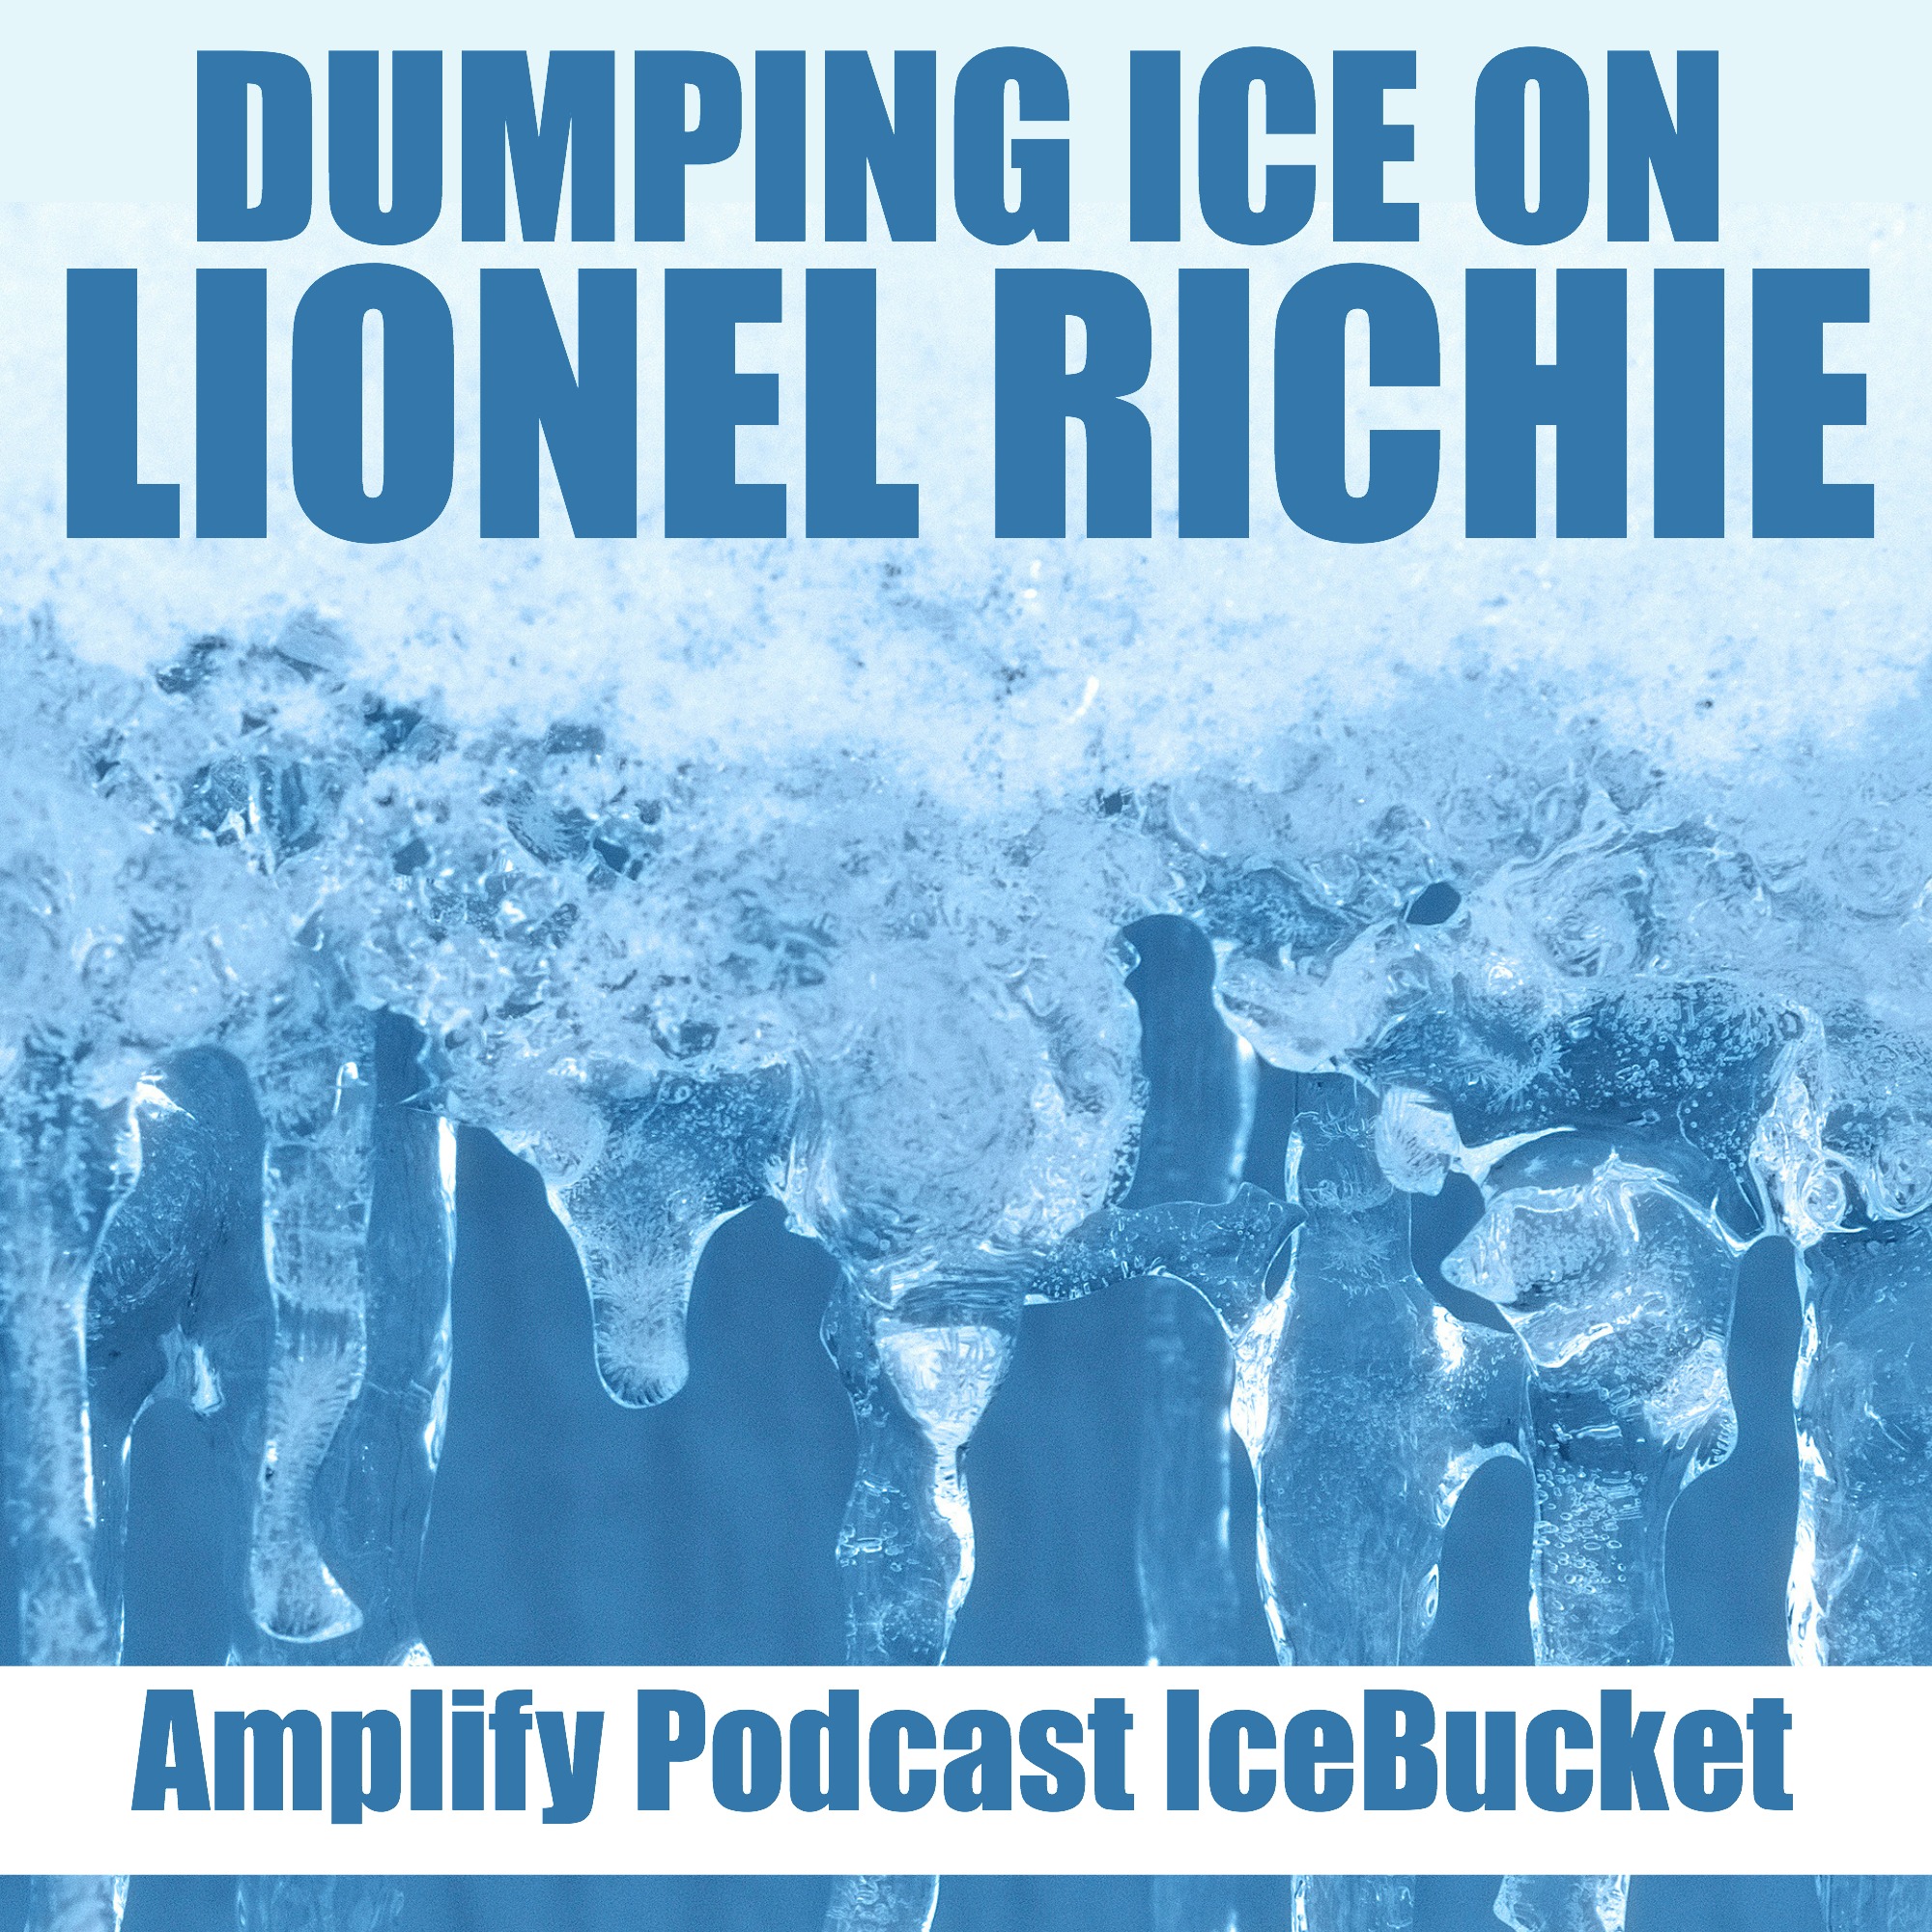 You are currently viewing Dumping Ice on Lionel Richie